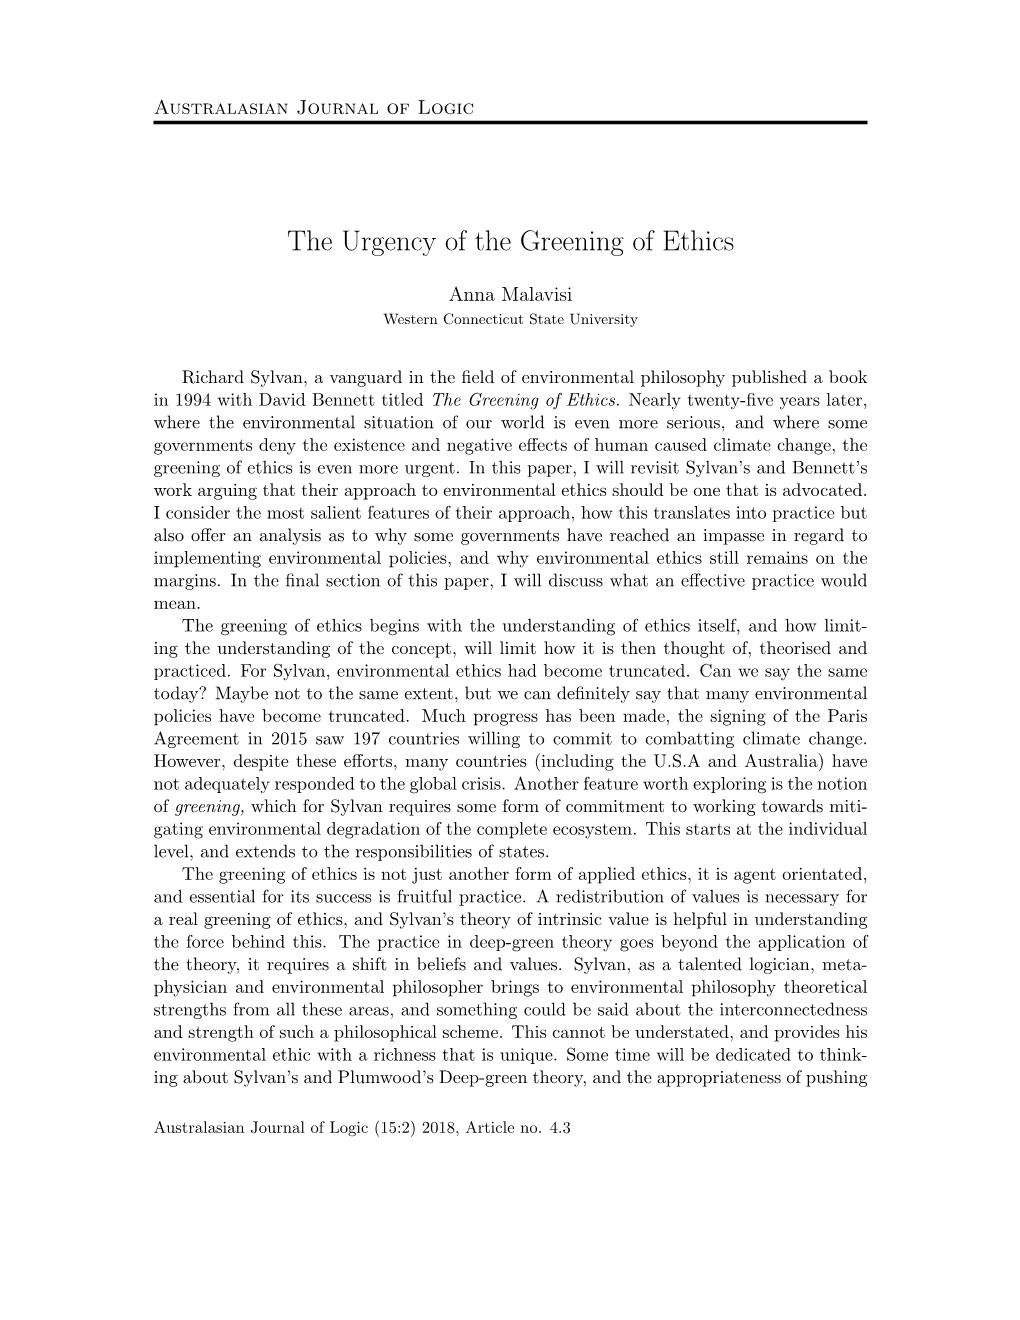 The Urgency of the Greening of Ethics